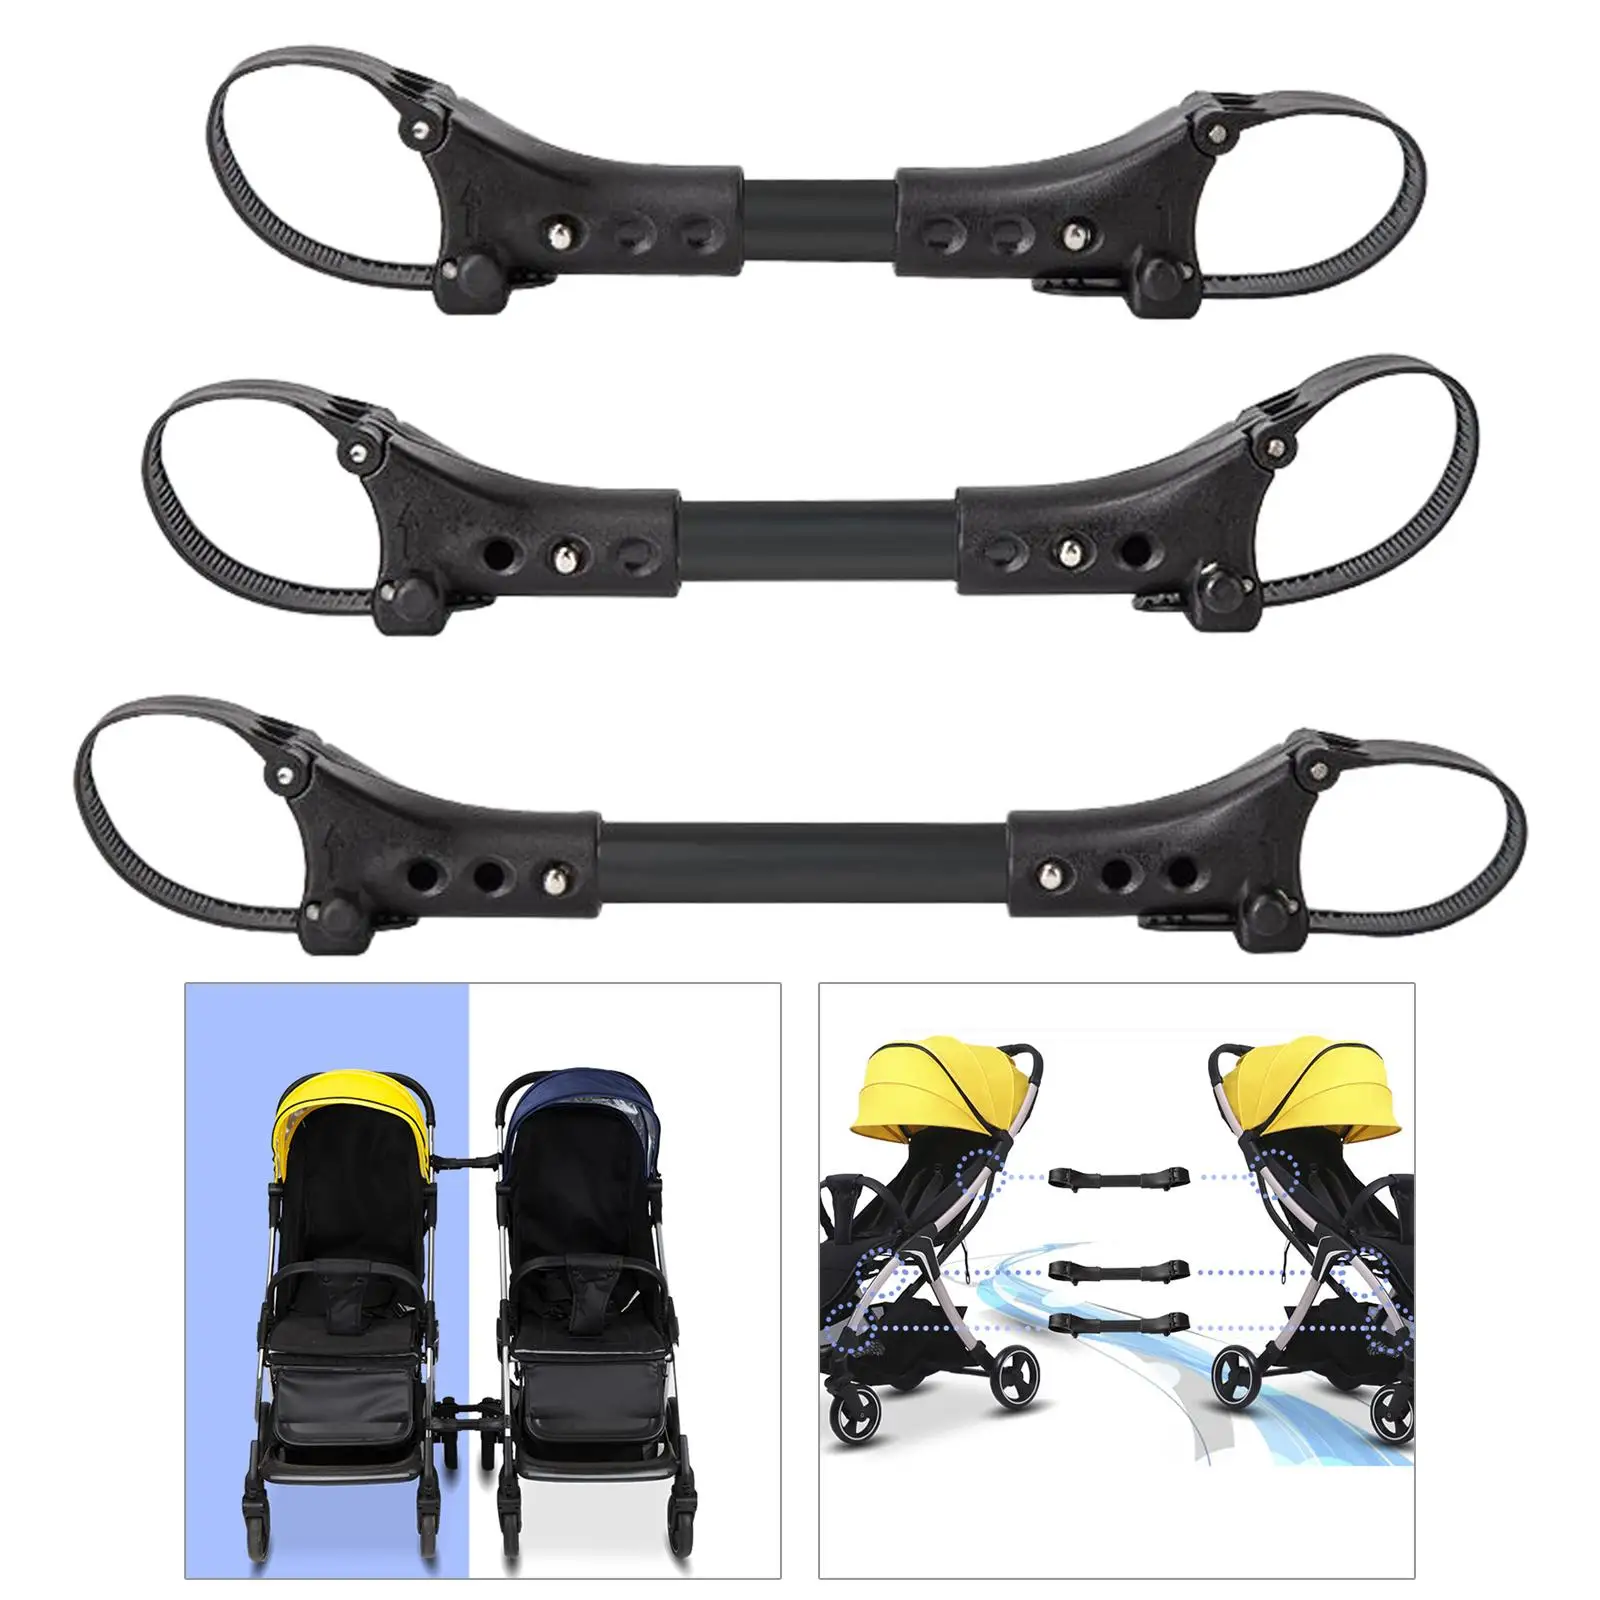 3Pcs Twin Baby Stroller Connector Secure Strap Attachment for Infant Cart